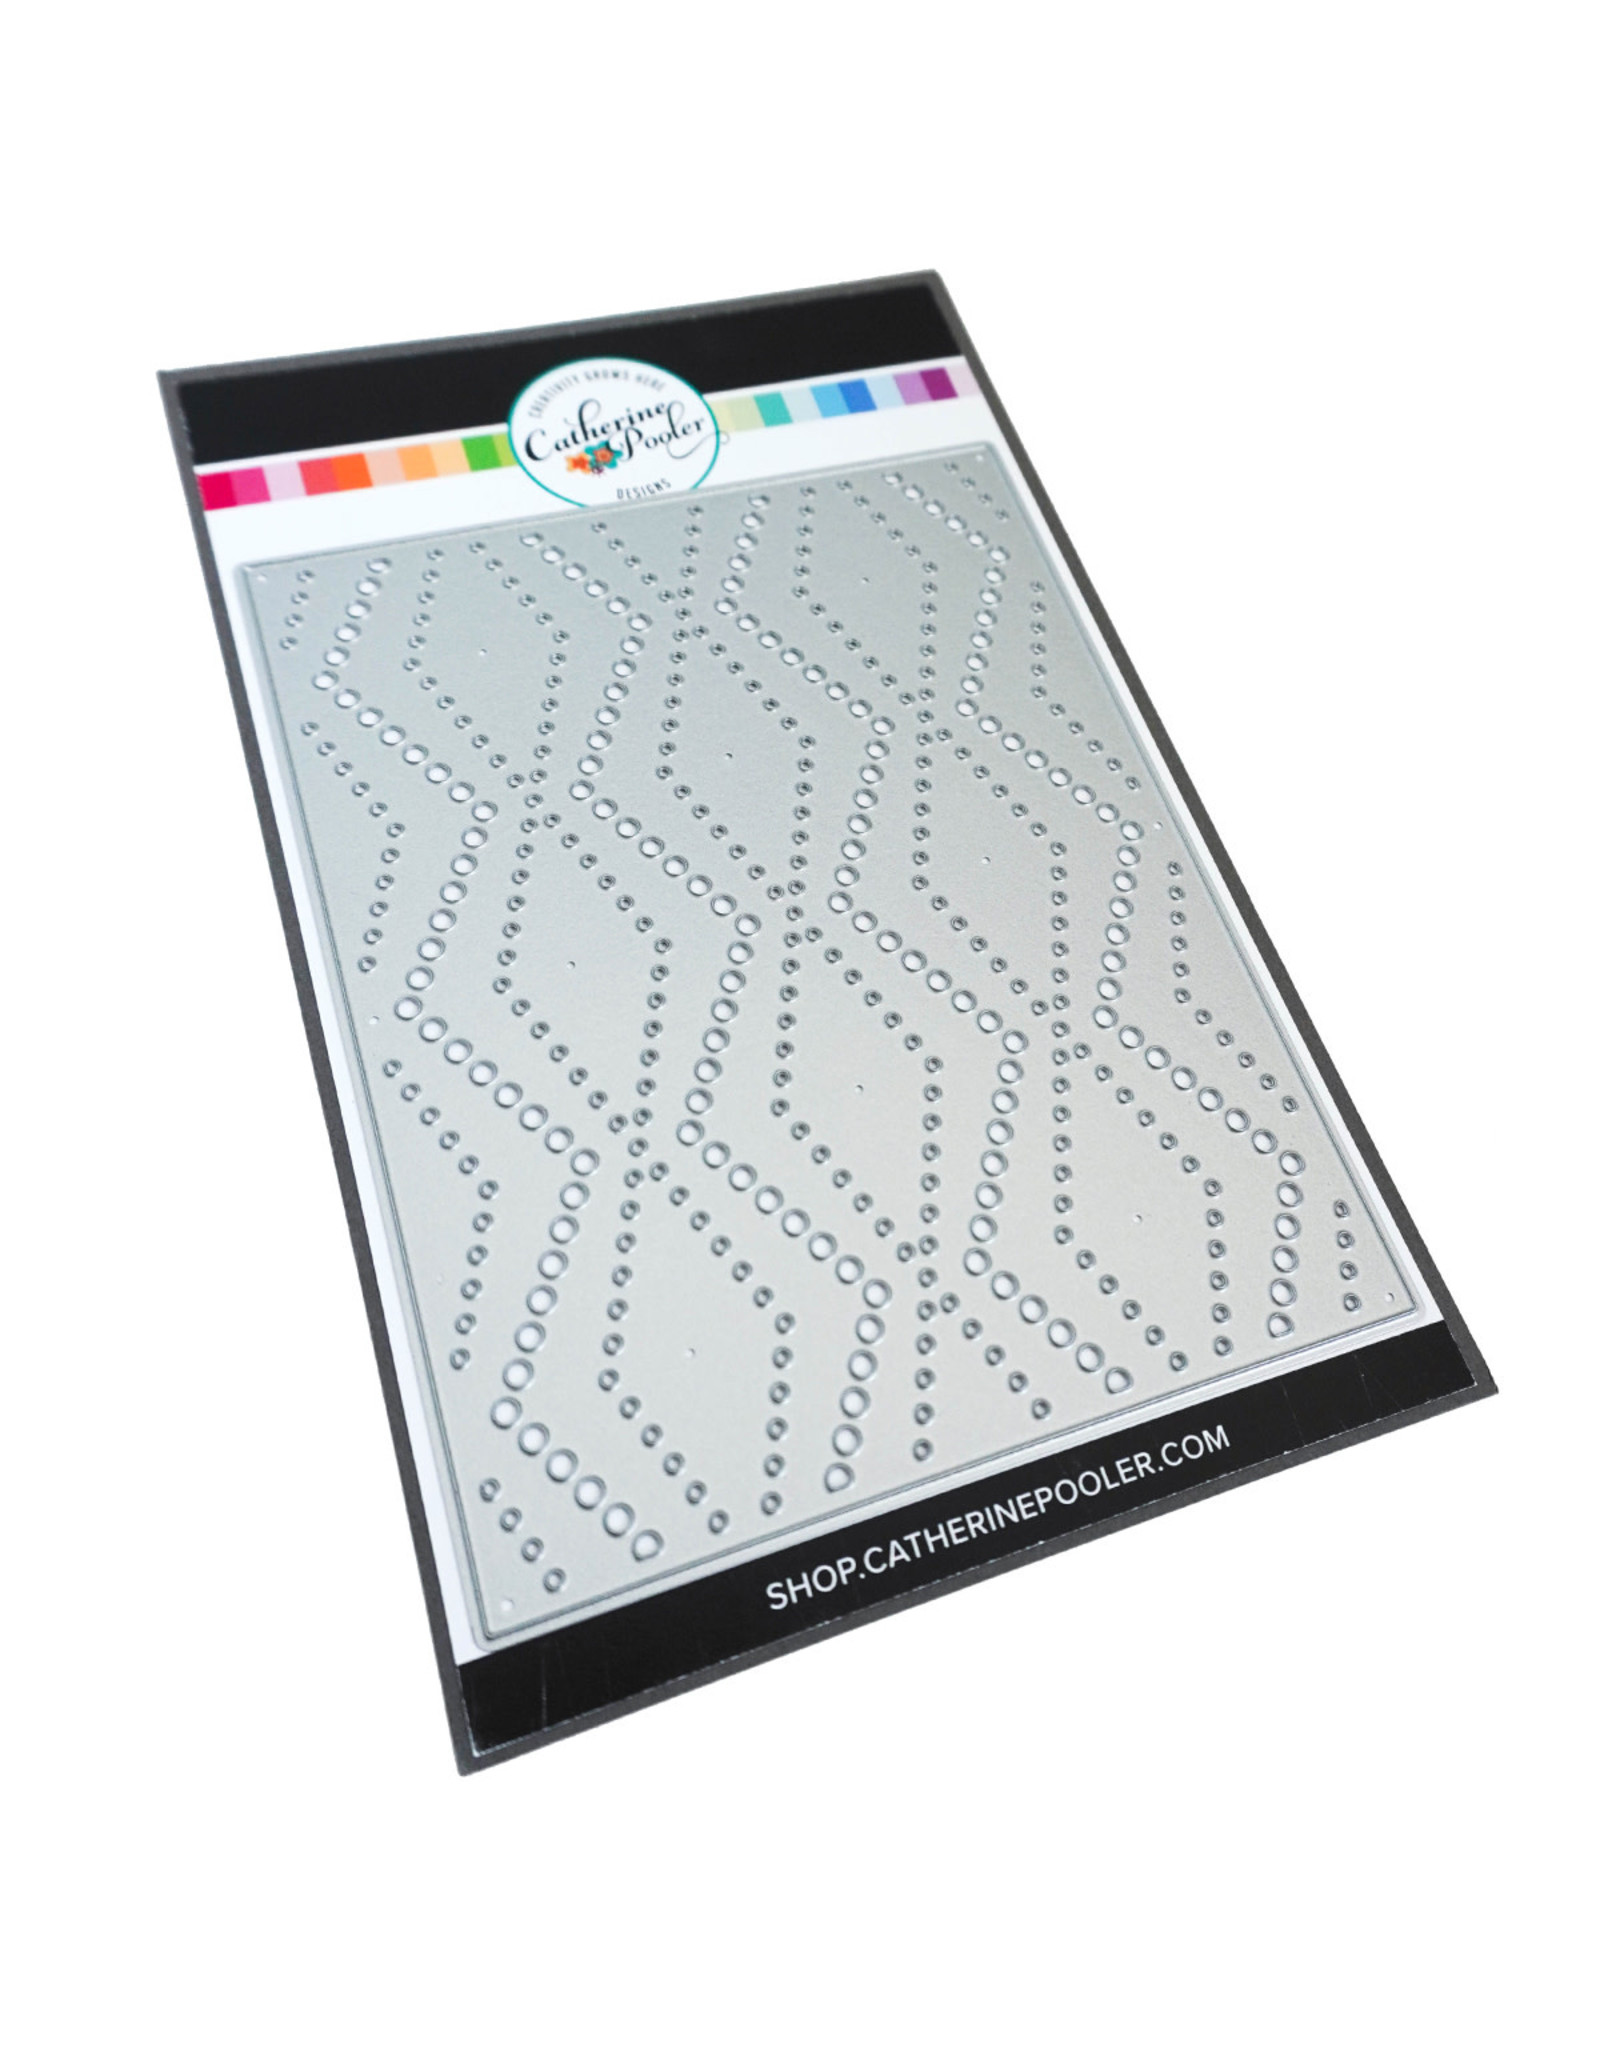 Catherine Pooler Designs Dotted Zig Zag Cover Plate Die